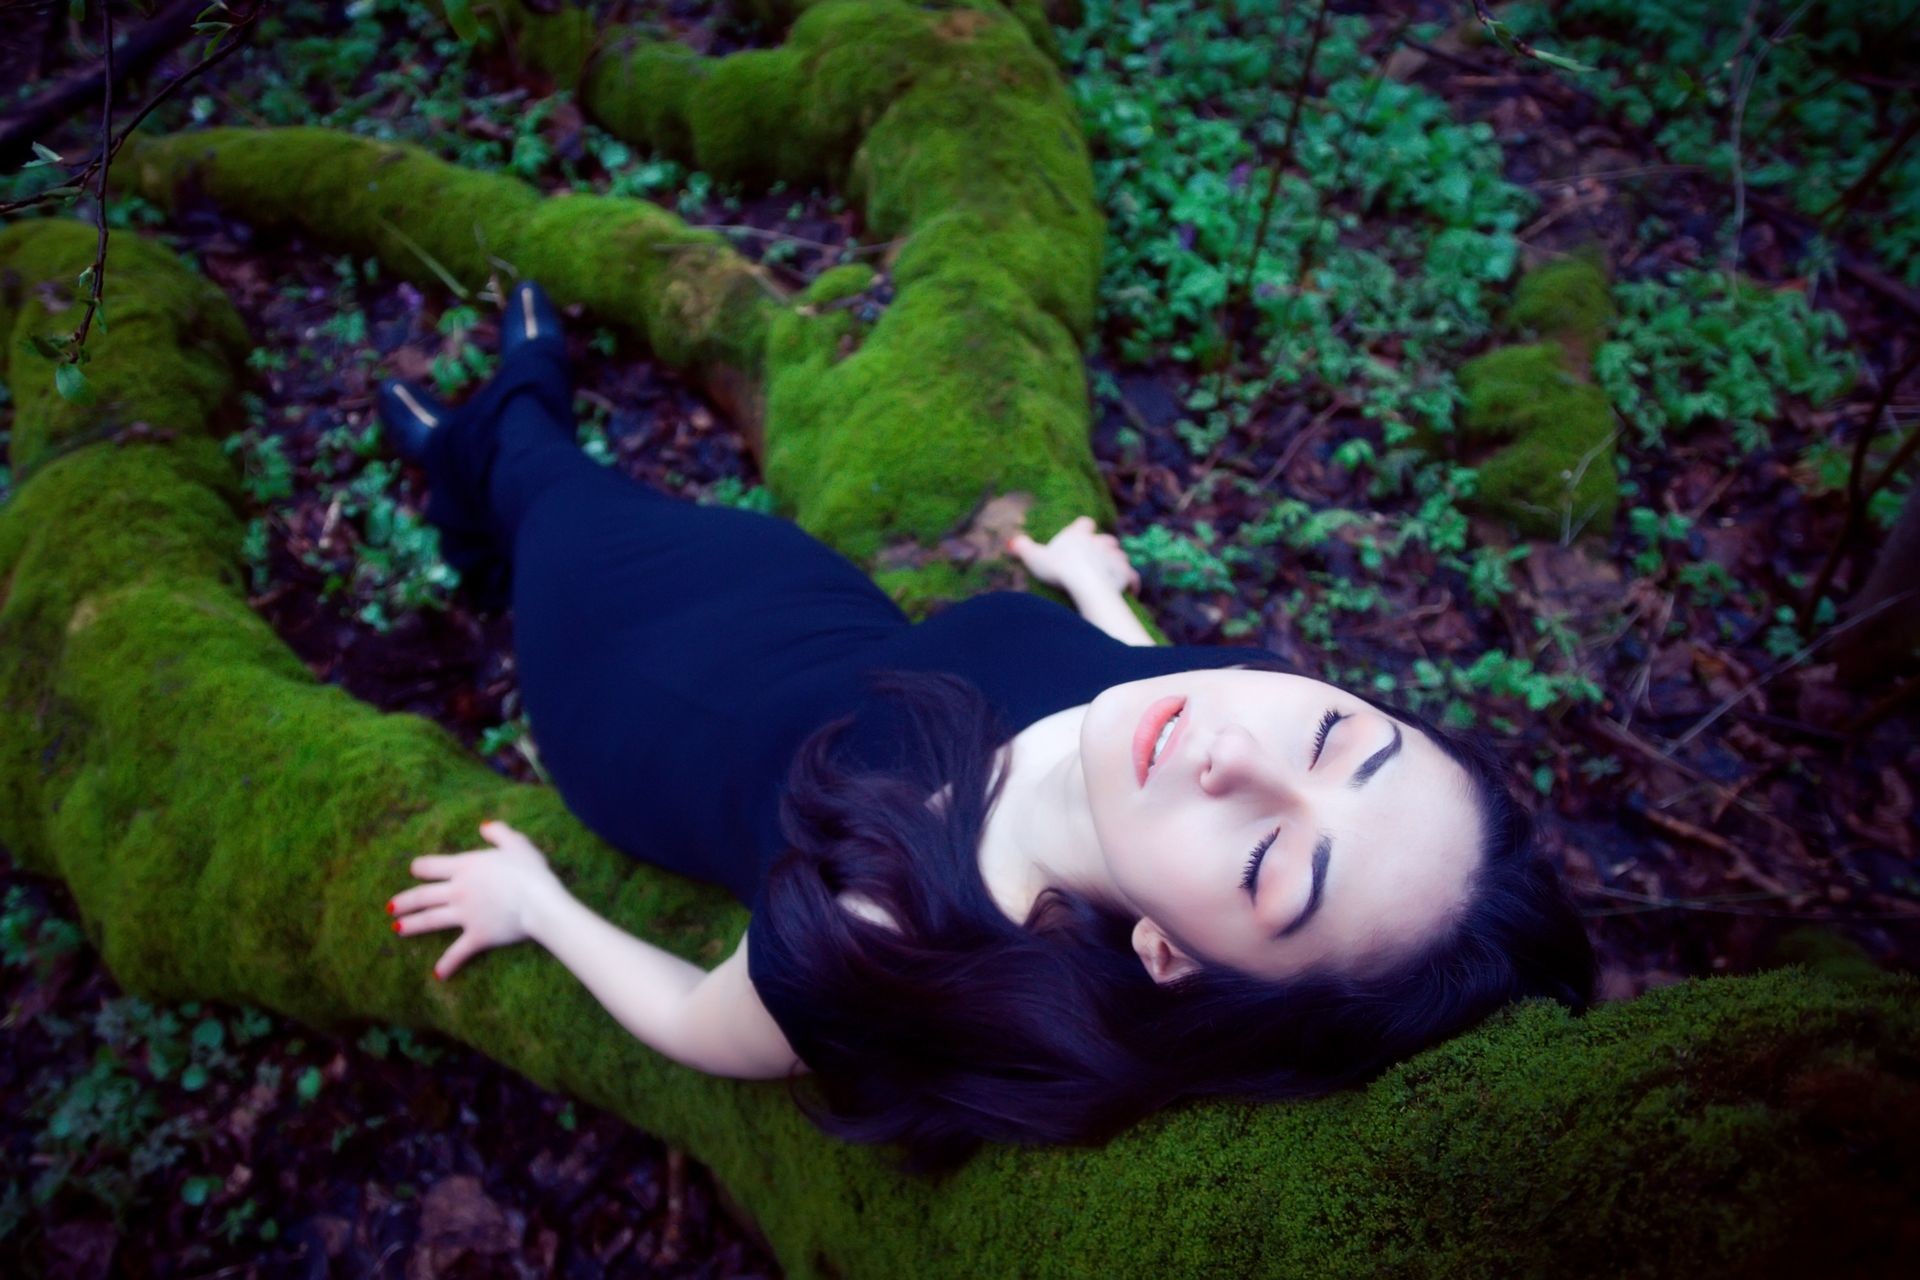 Fashion shot of a dark-haired beautiful woman lying on a moss-covered big tree roots.
The young woman is a very beautiful and attractive. The girl is dressed in black dress. She is carefree and serene